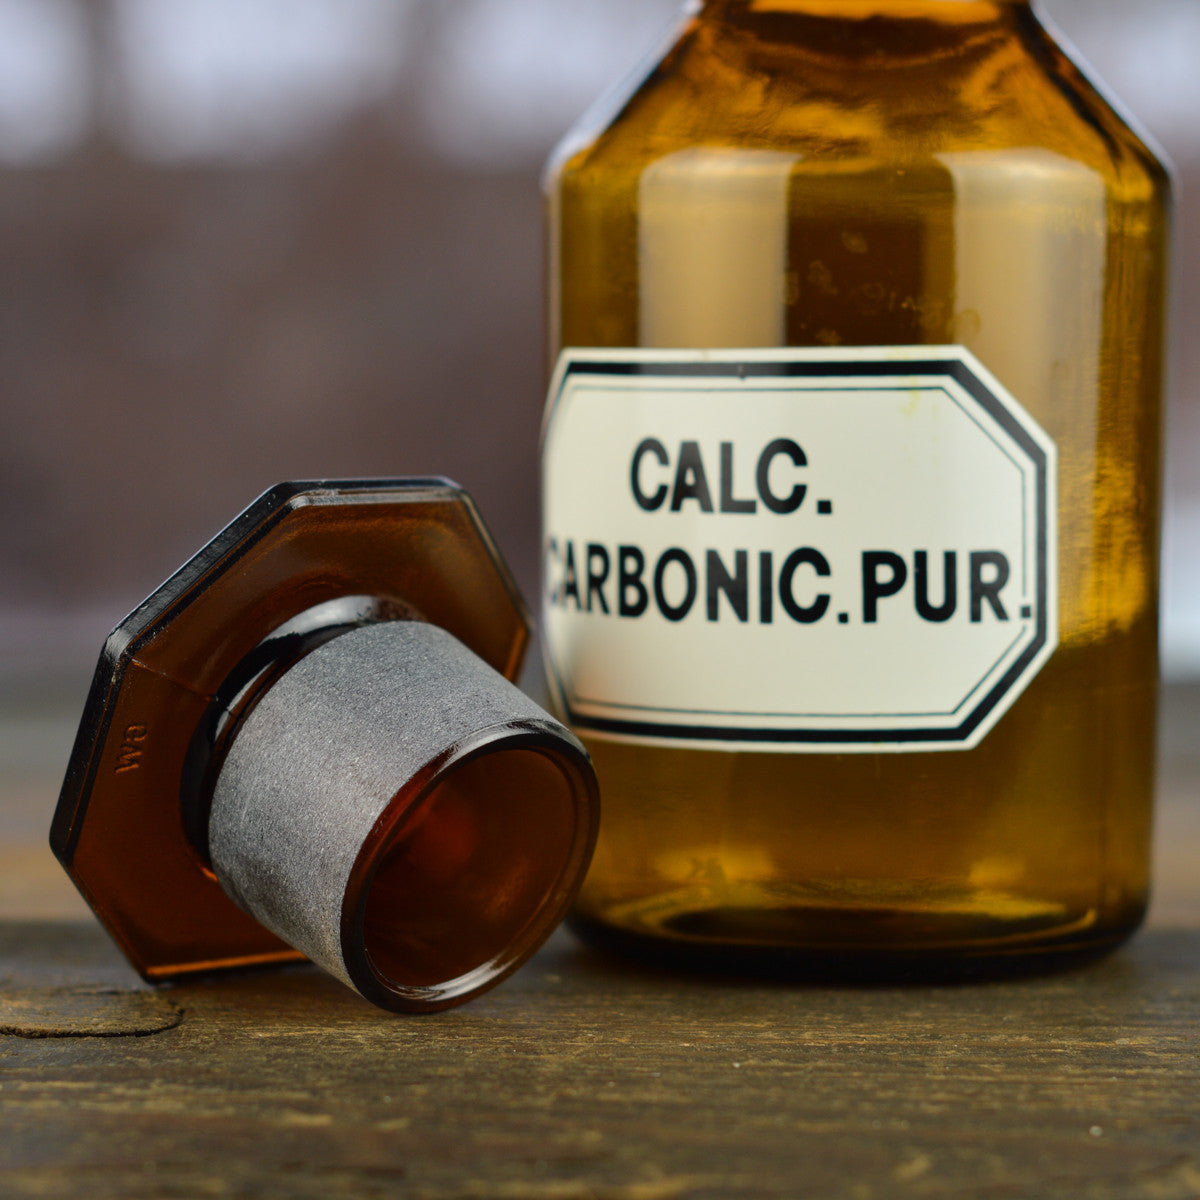 1930’s - 1940’s Apothecary Jar with Latin Label CALC. CARBONIC. PUR. and Hexagon Stopper